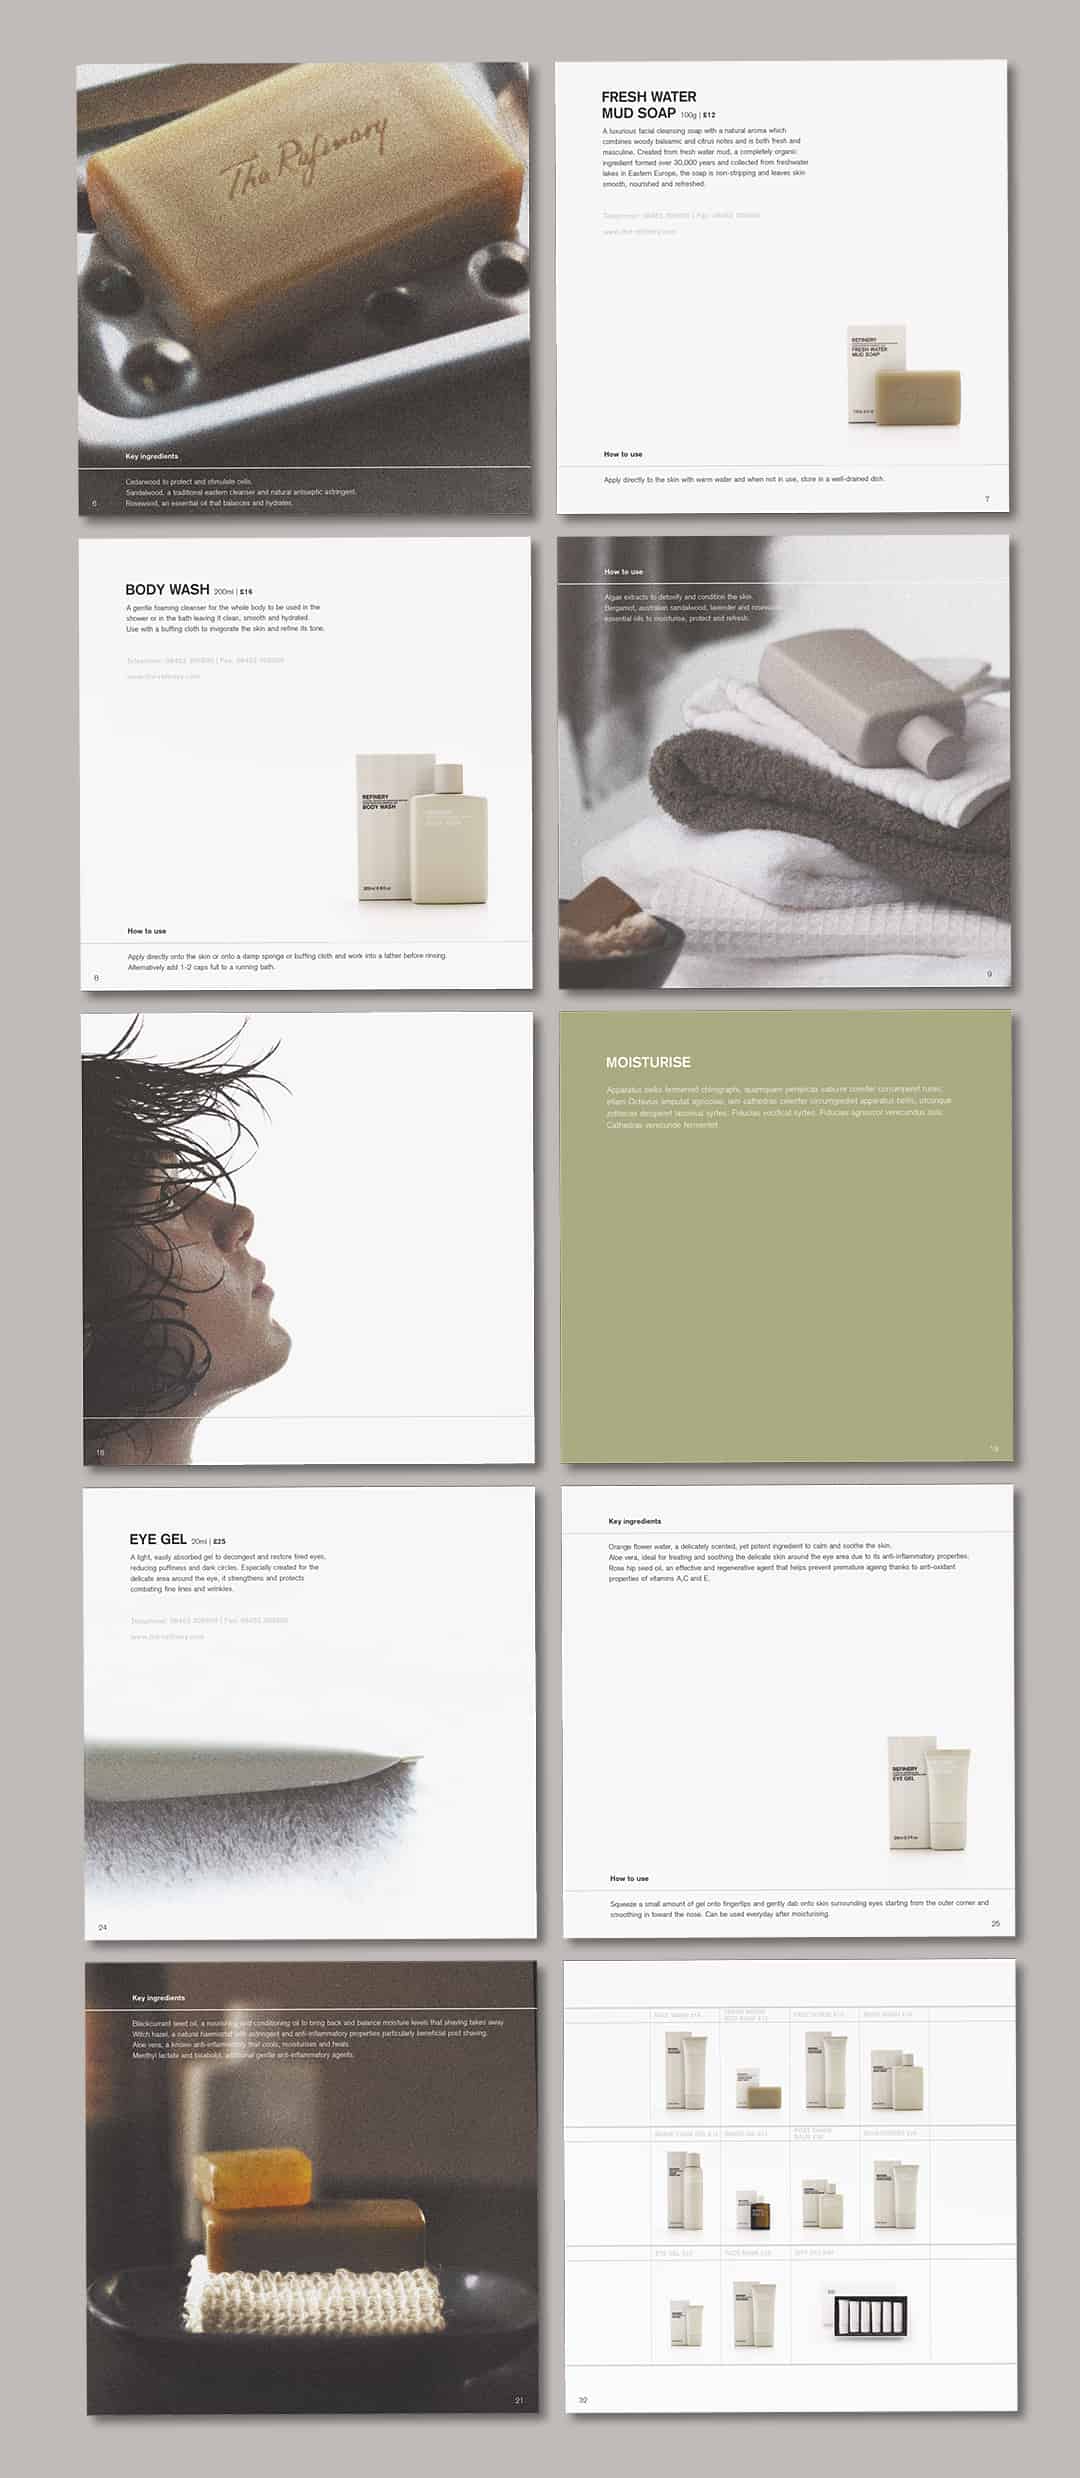 Skincare brochure design page examples - designed by Paul Cartwright Branding.